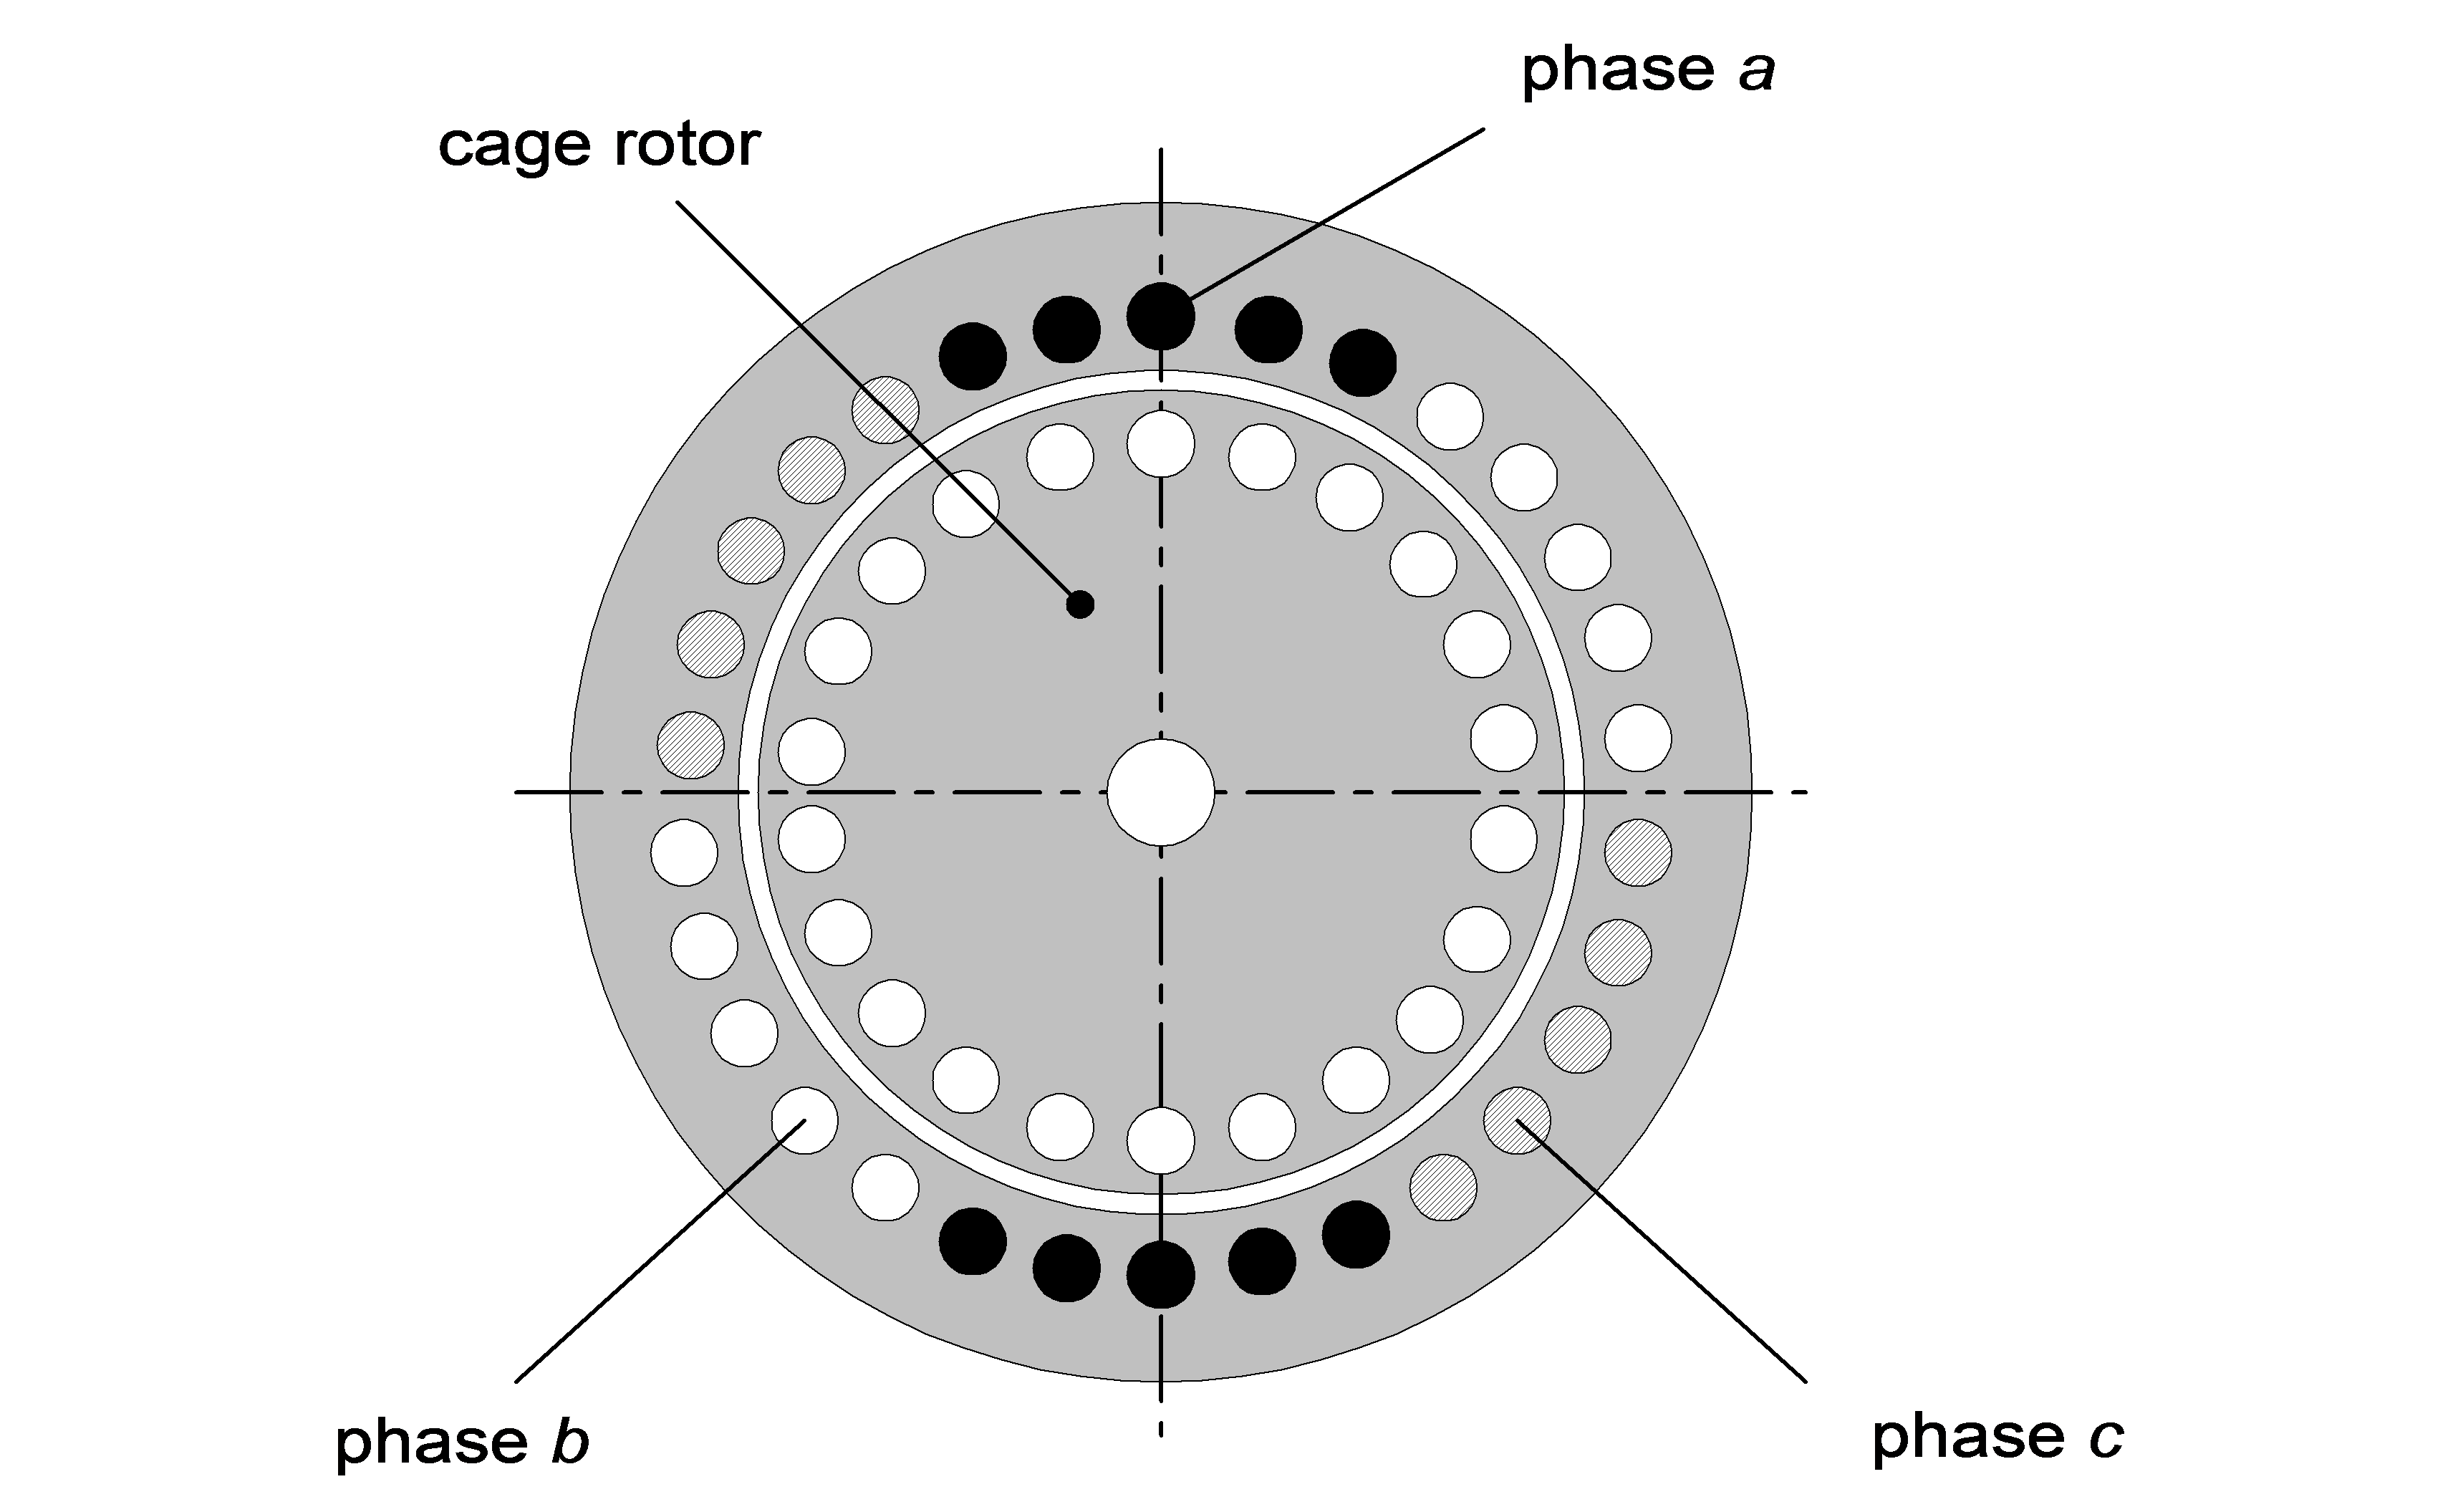 Cross section of an Induction Motor